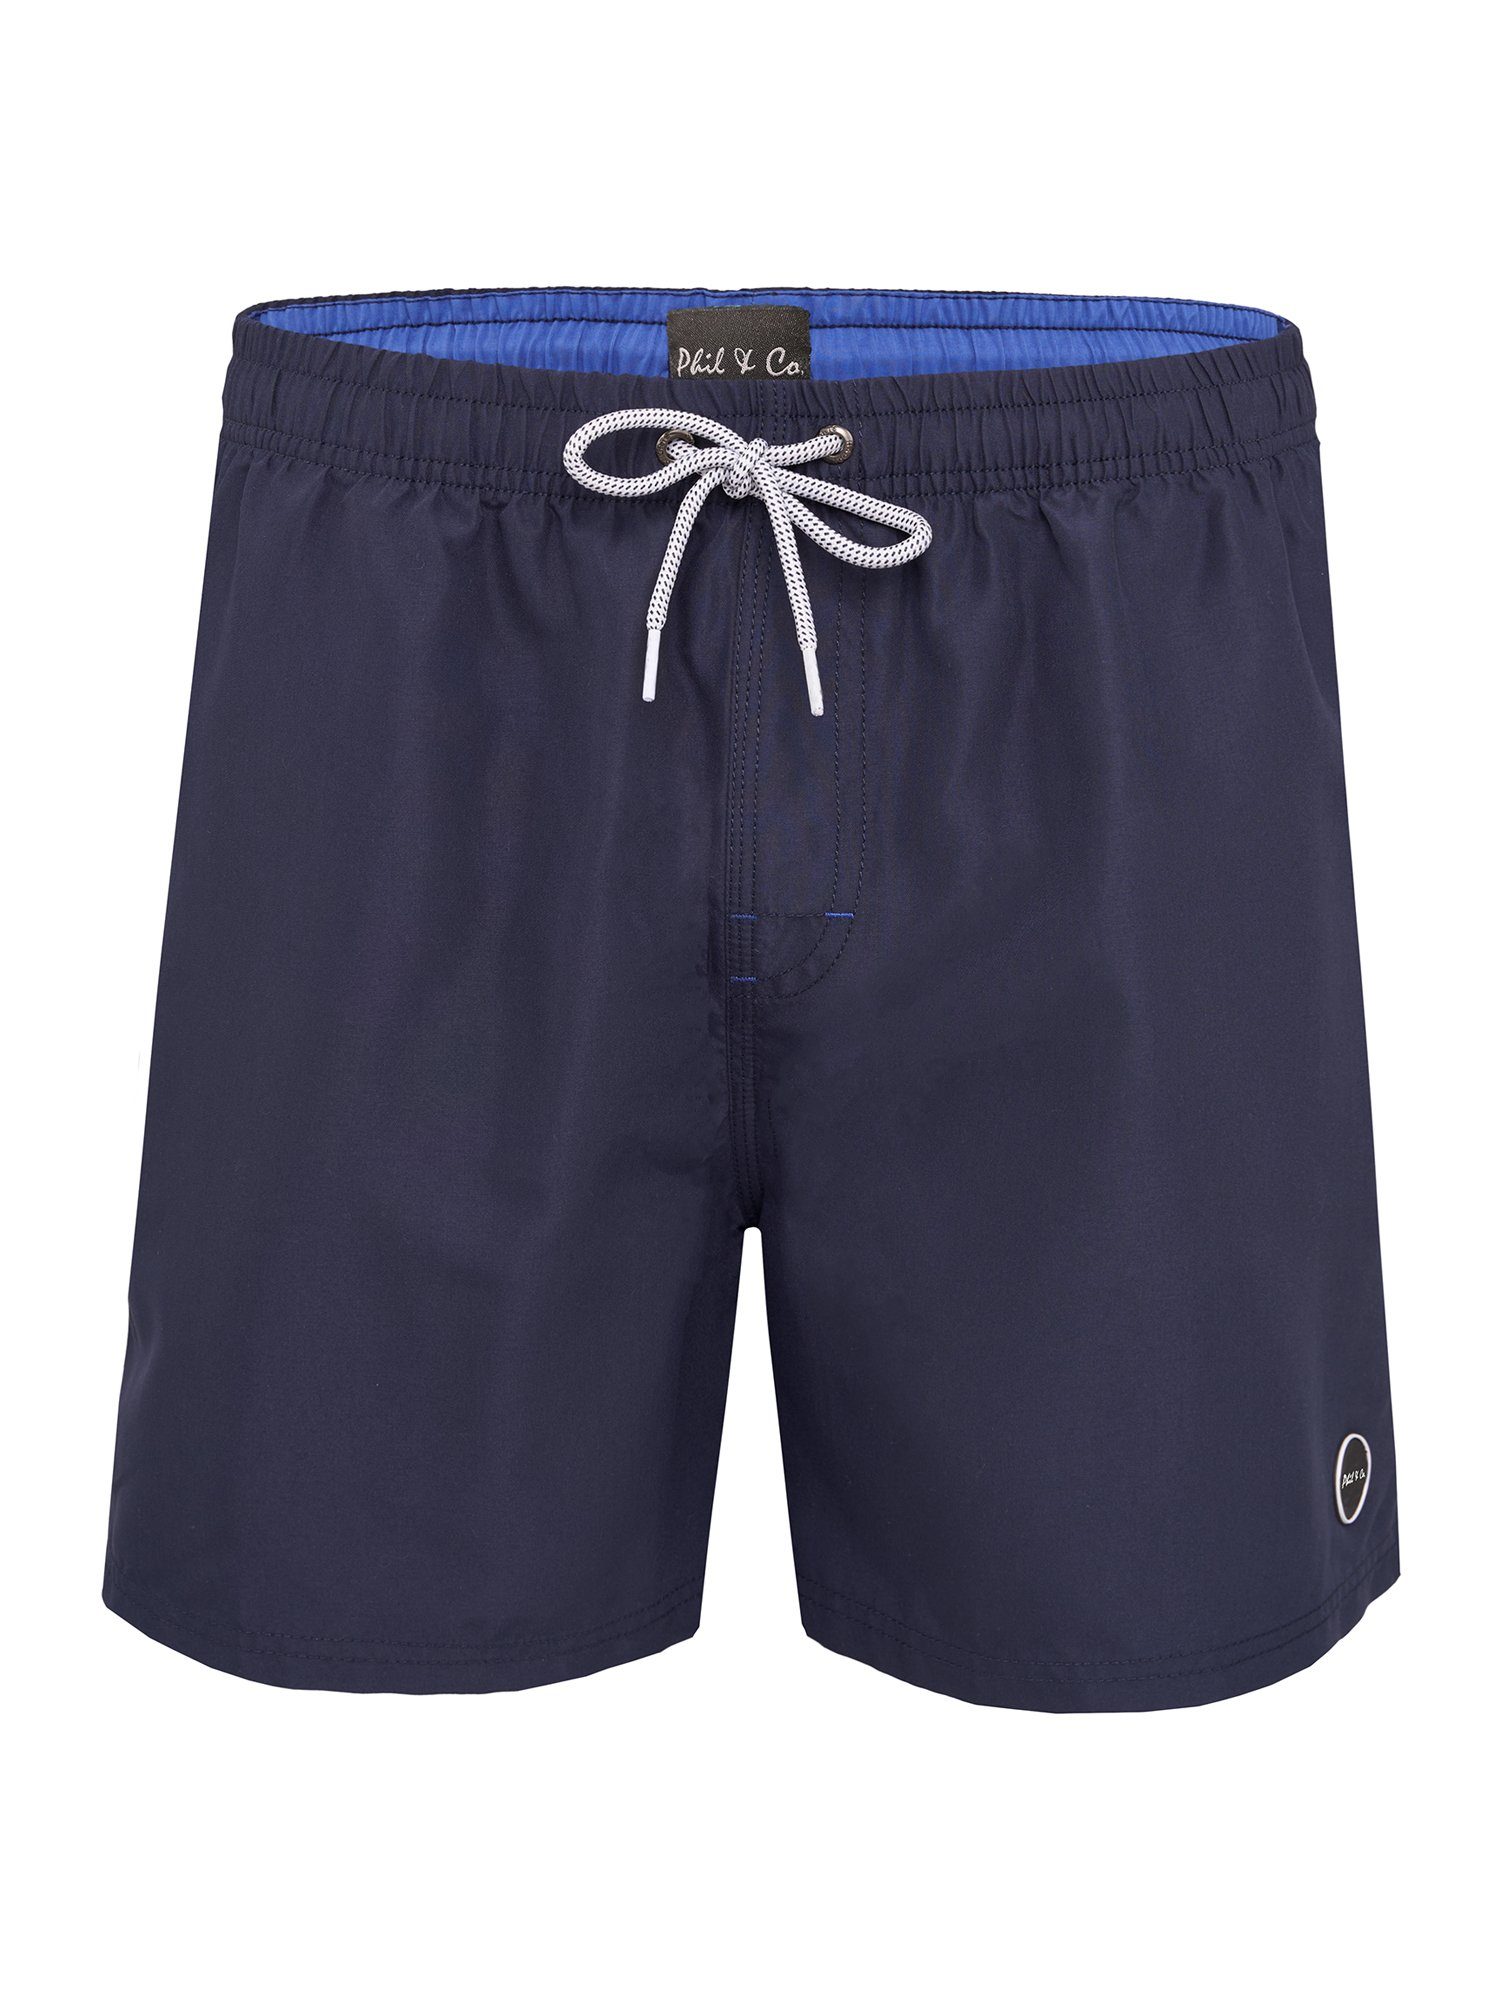 Phil & Co. Badeshorts Classic (1-St) navy solid